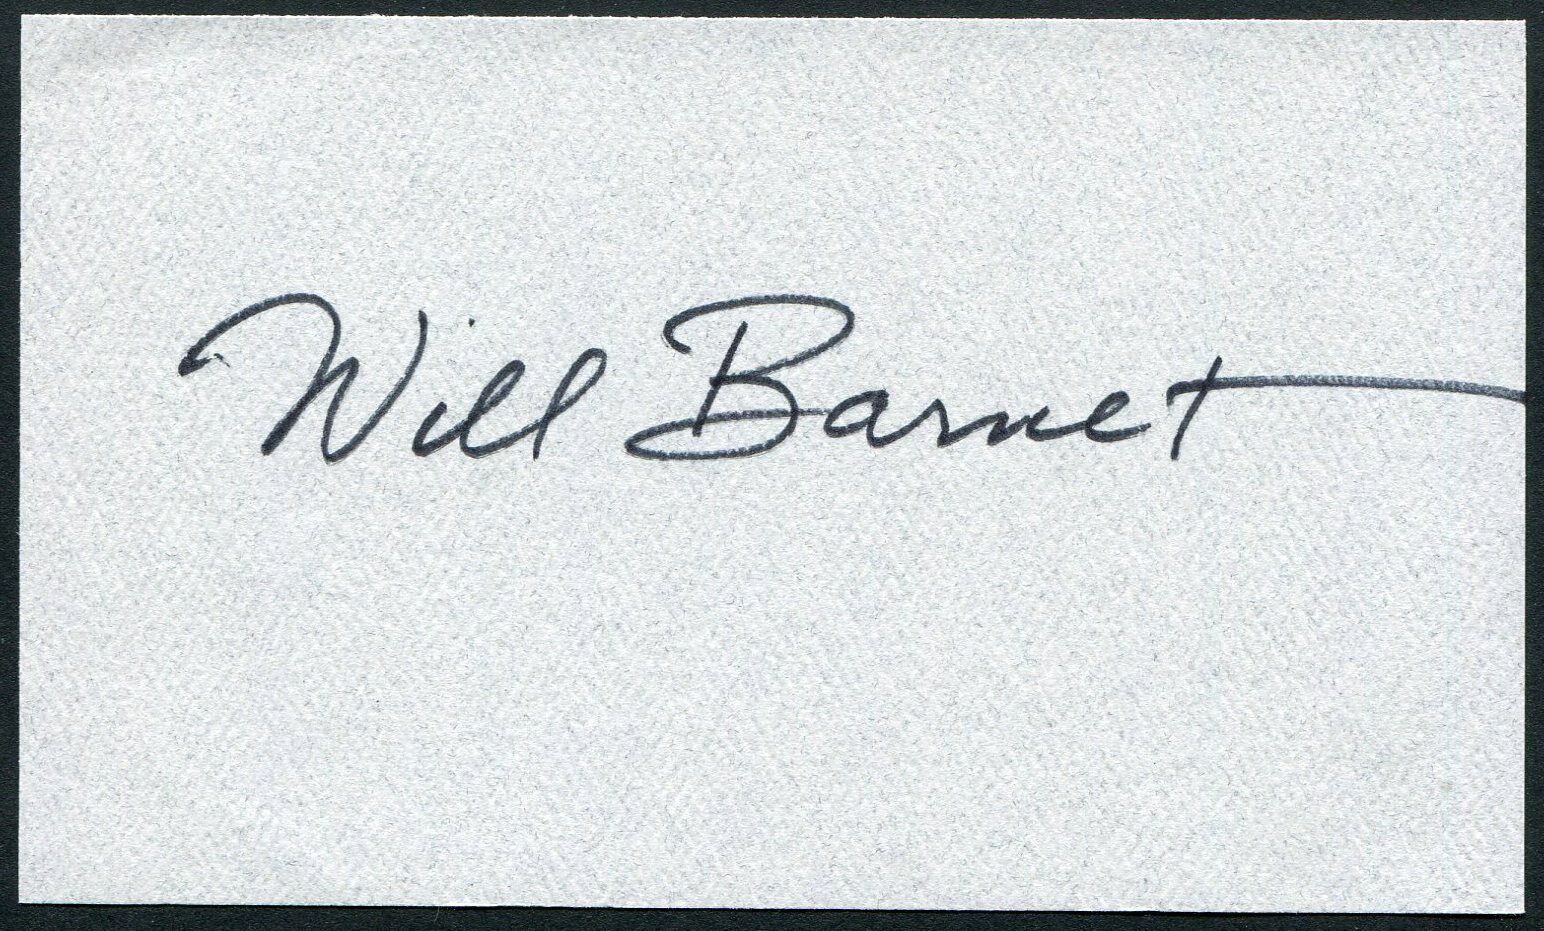 WILL BARNET SIGNED 3X5 INDEX CARD ARTIST PAINTER NATIONAL MEDAL OF ARTS AWARD